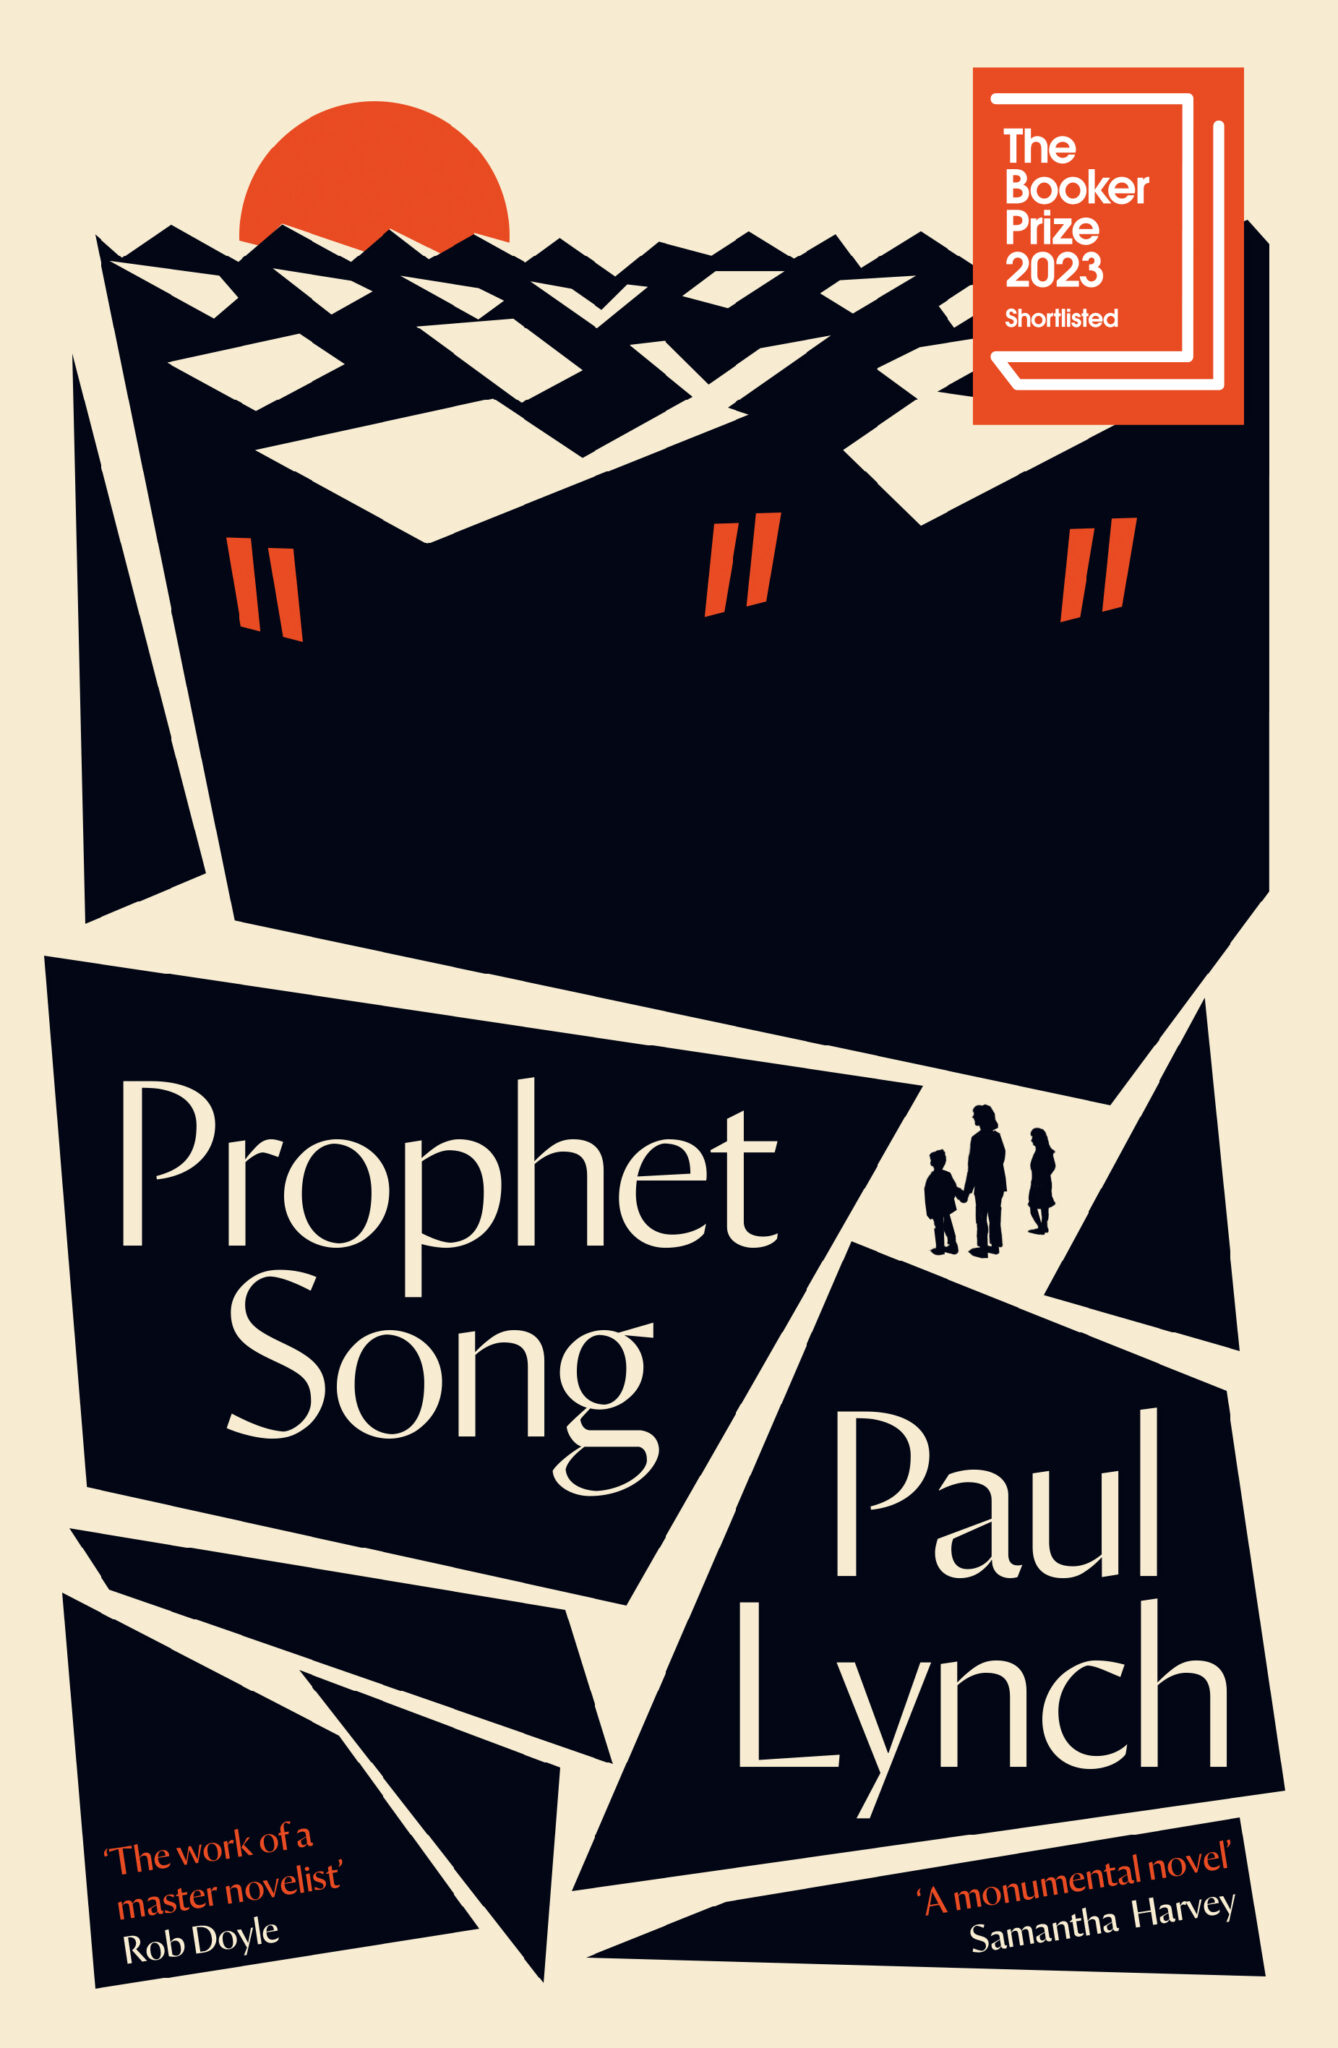 The cover of 'Prophet Song' by Paul Lynch